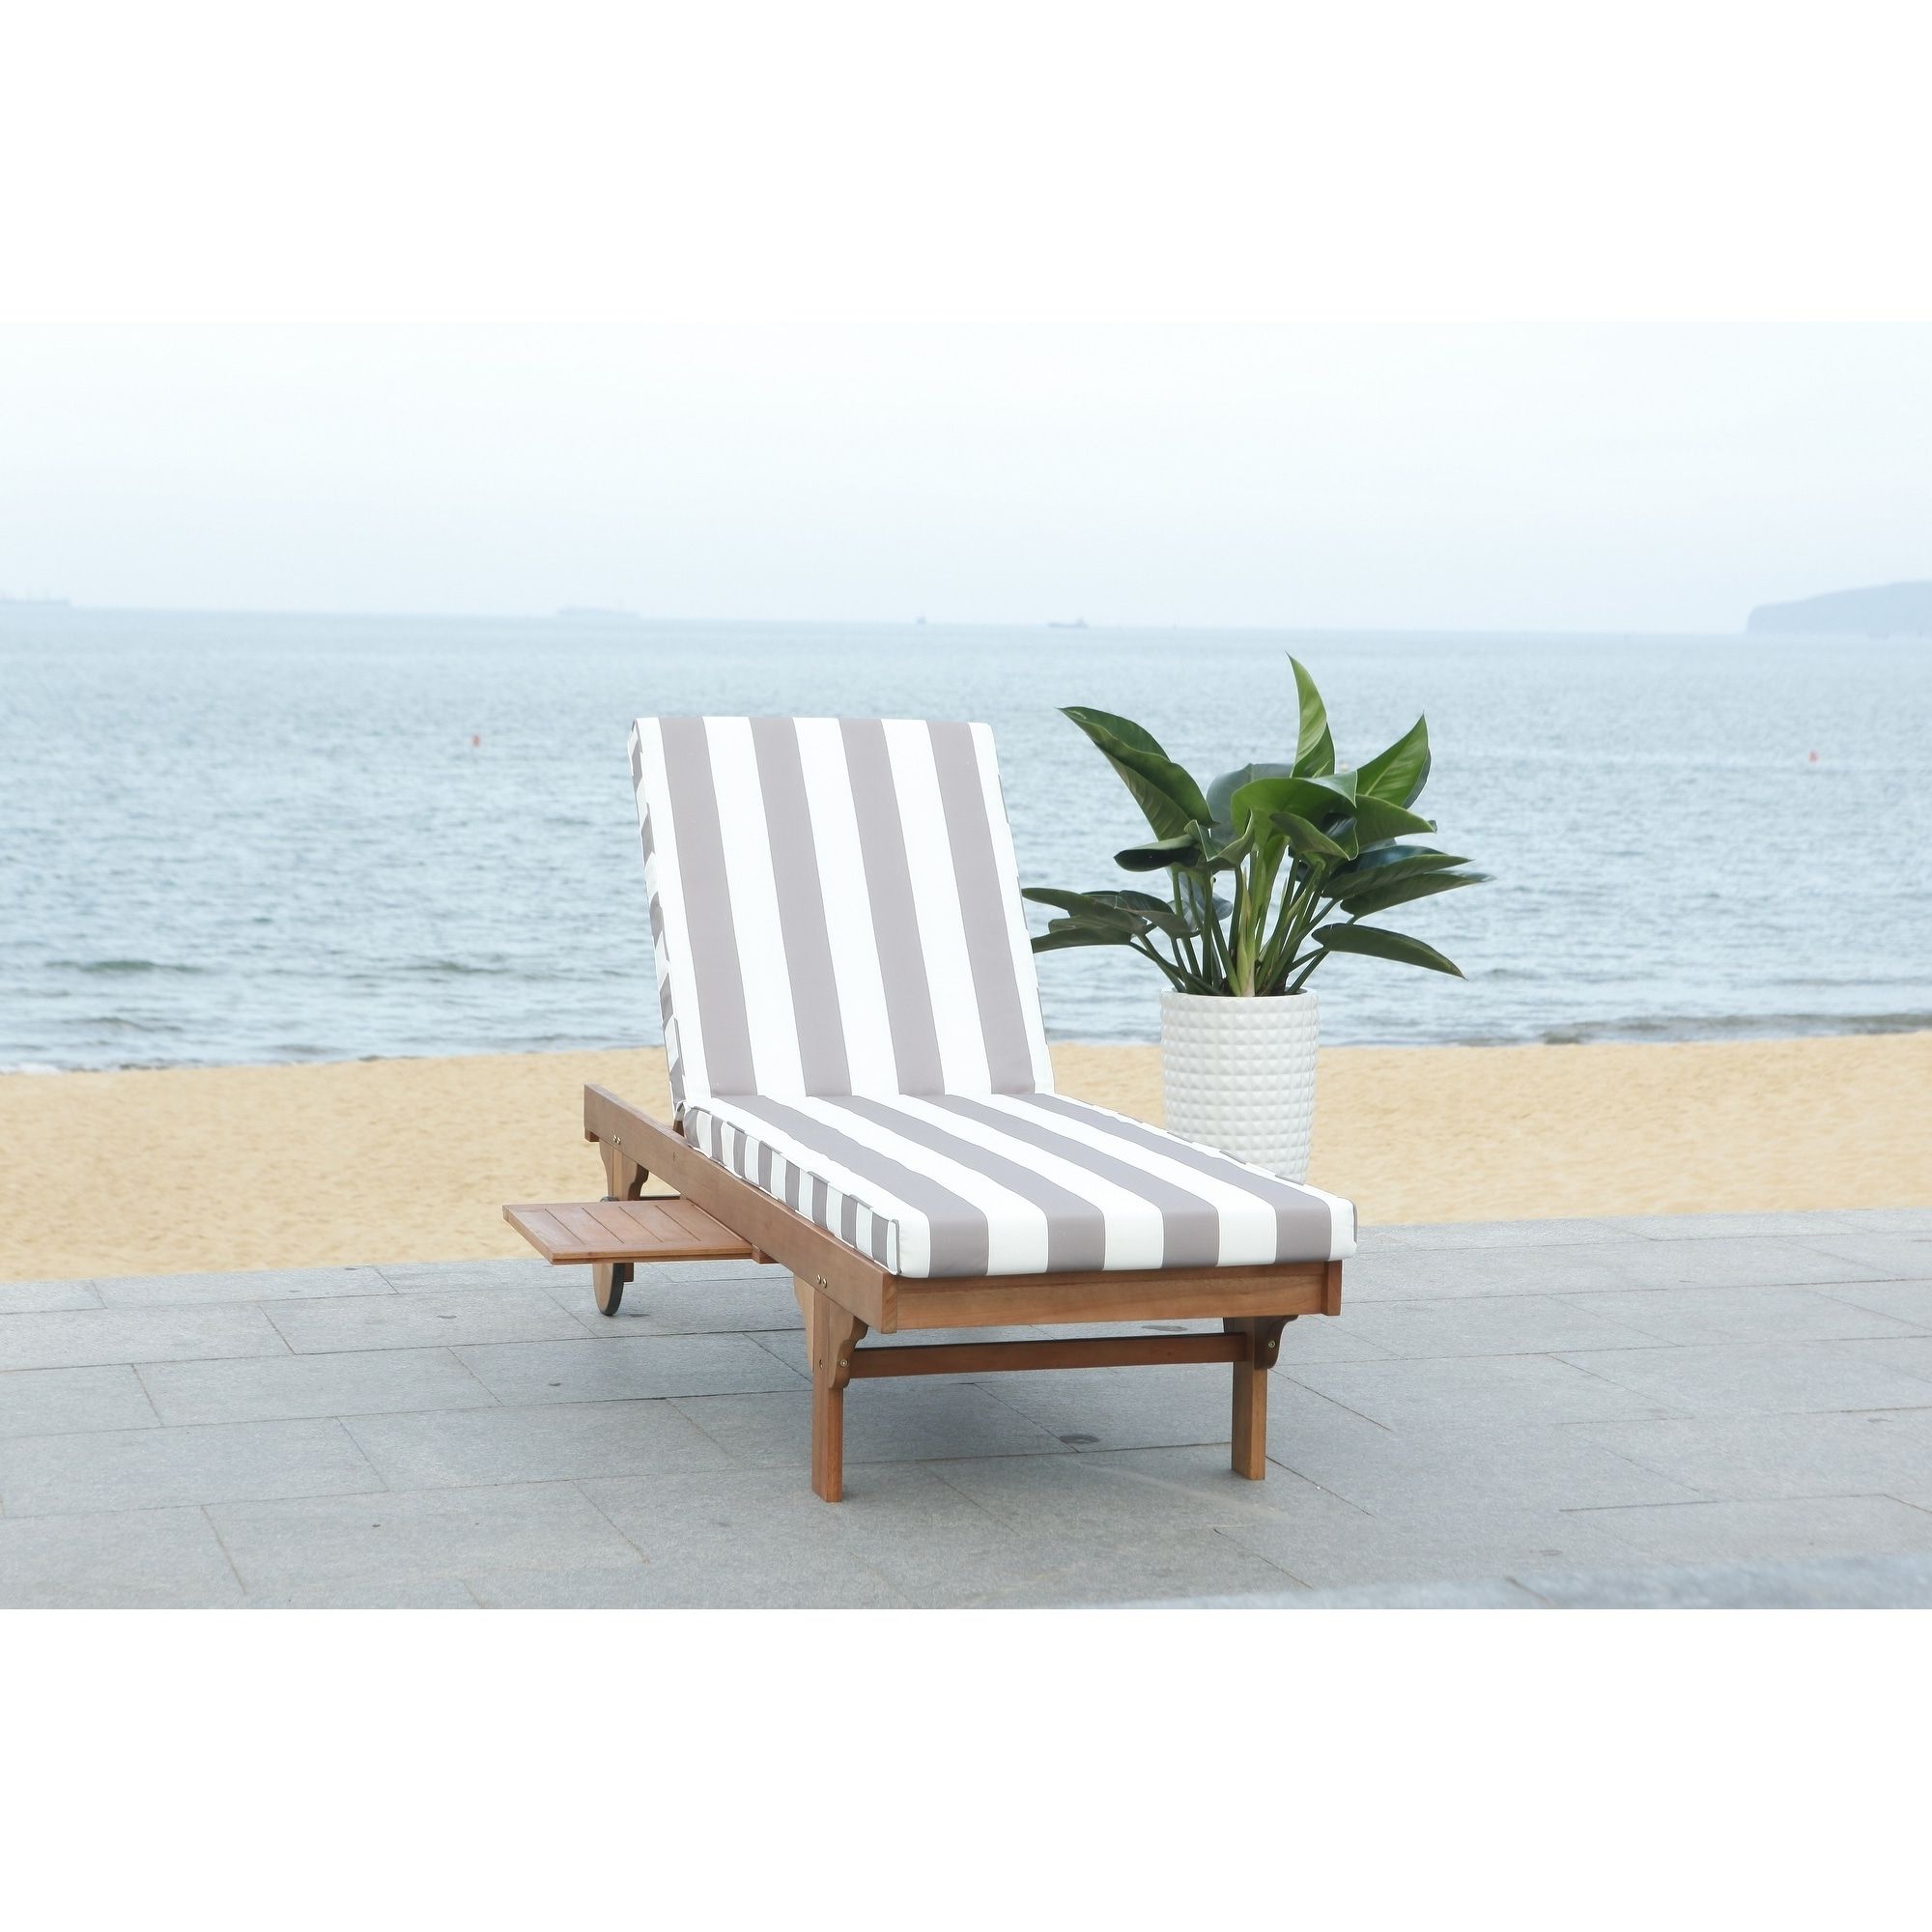 2020 Cart Wheel Adjustable Chaise Lounge Chairs Within Safavieh Outdoor Living Newport Grey/ White Stripe Cart (View 3 of 25)